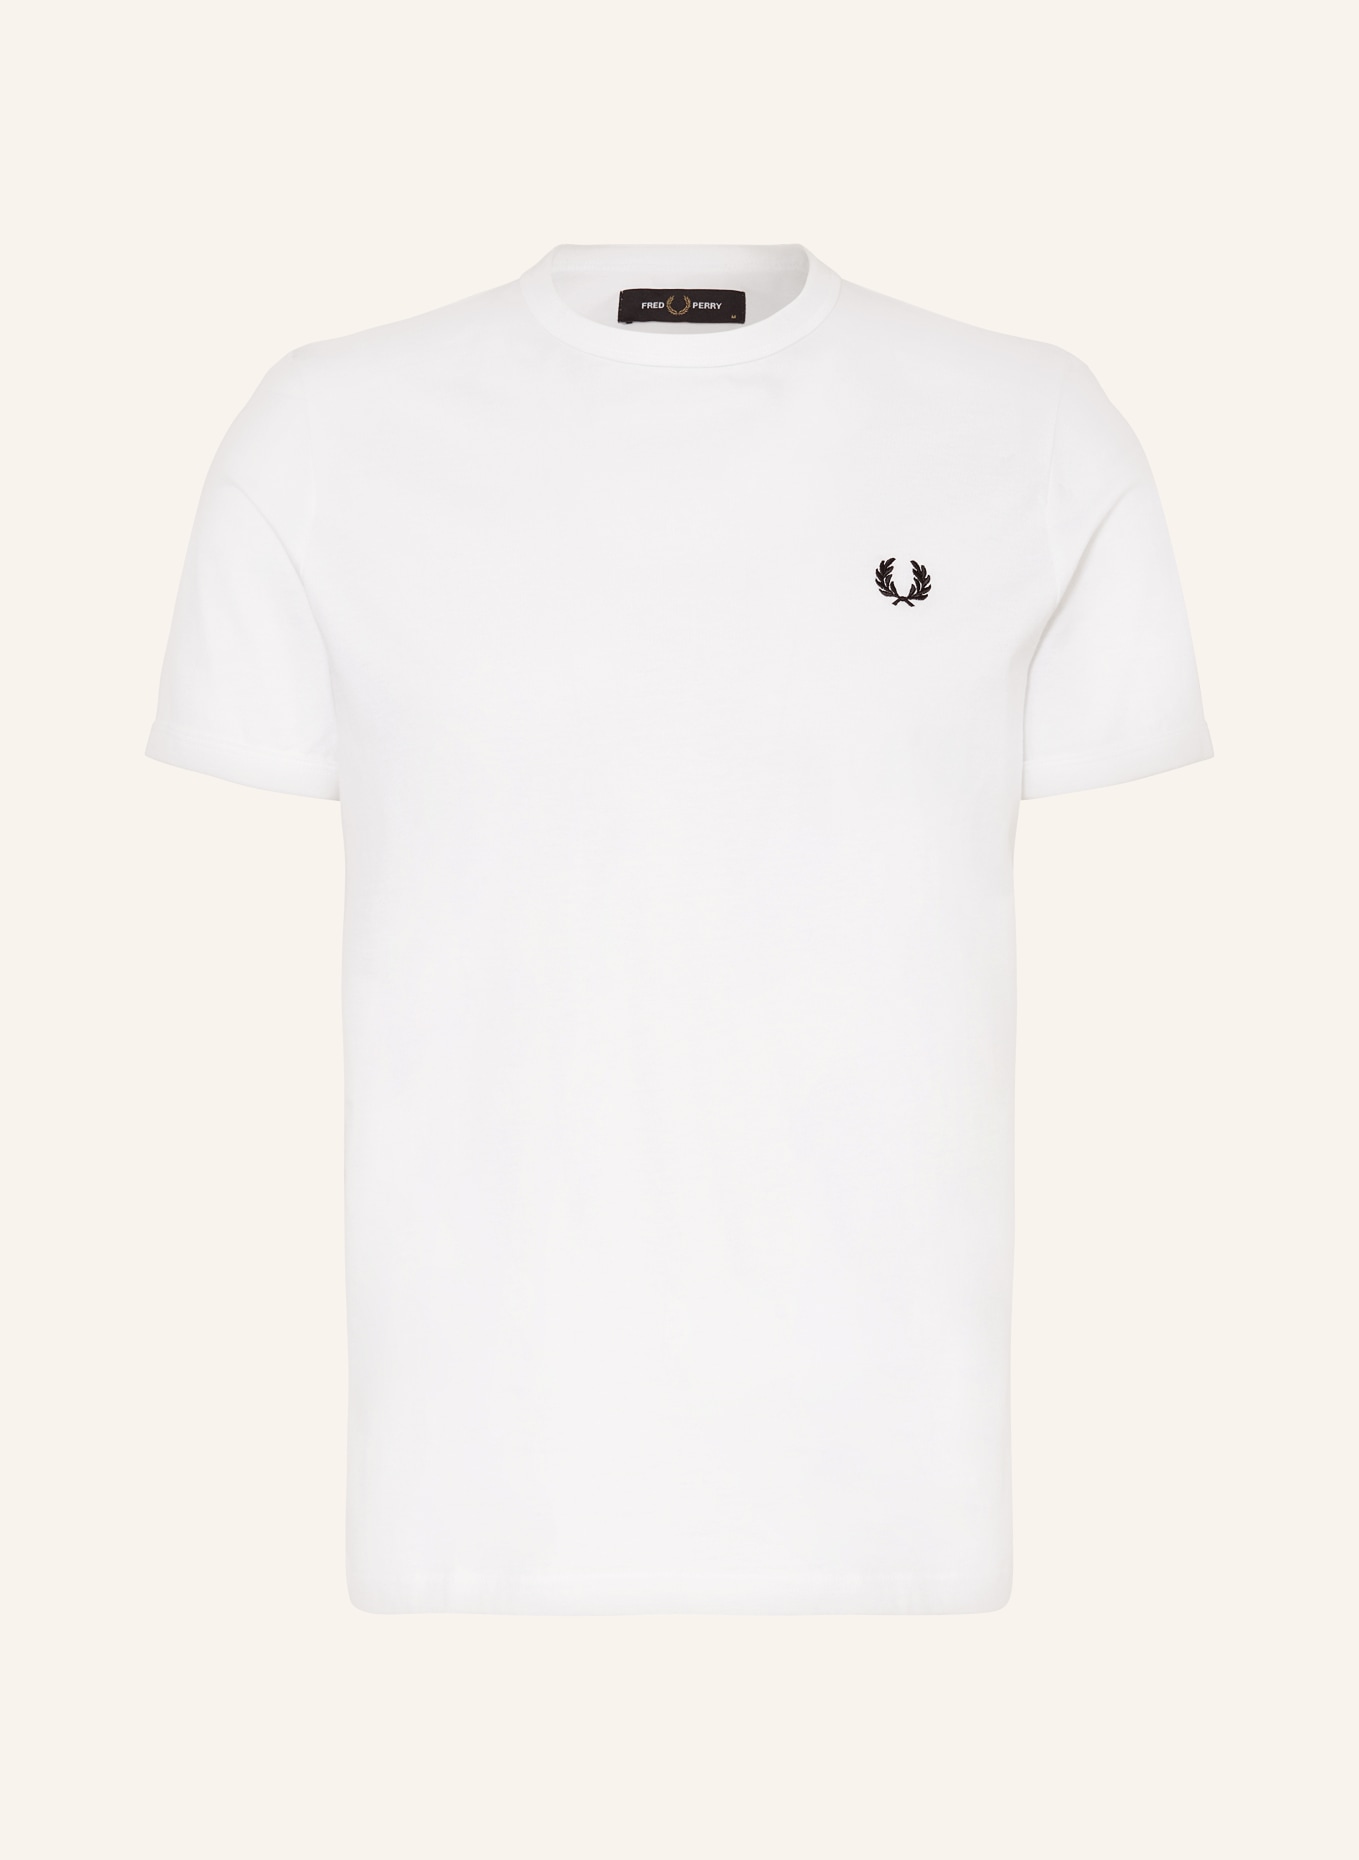 FRED PERRY T-Shirt, Farbe: WEISS (Bild 1)